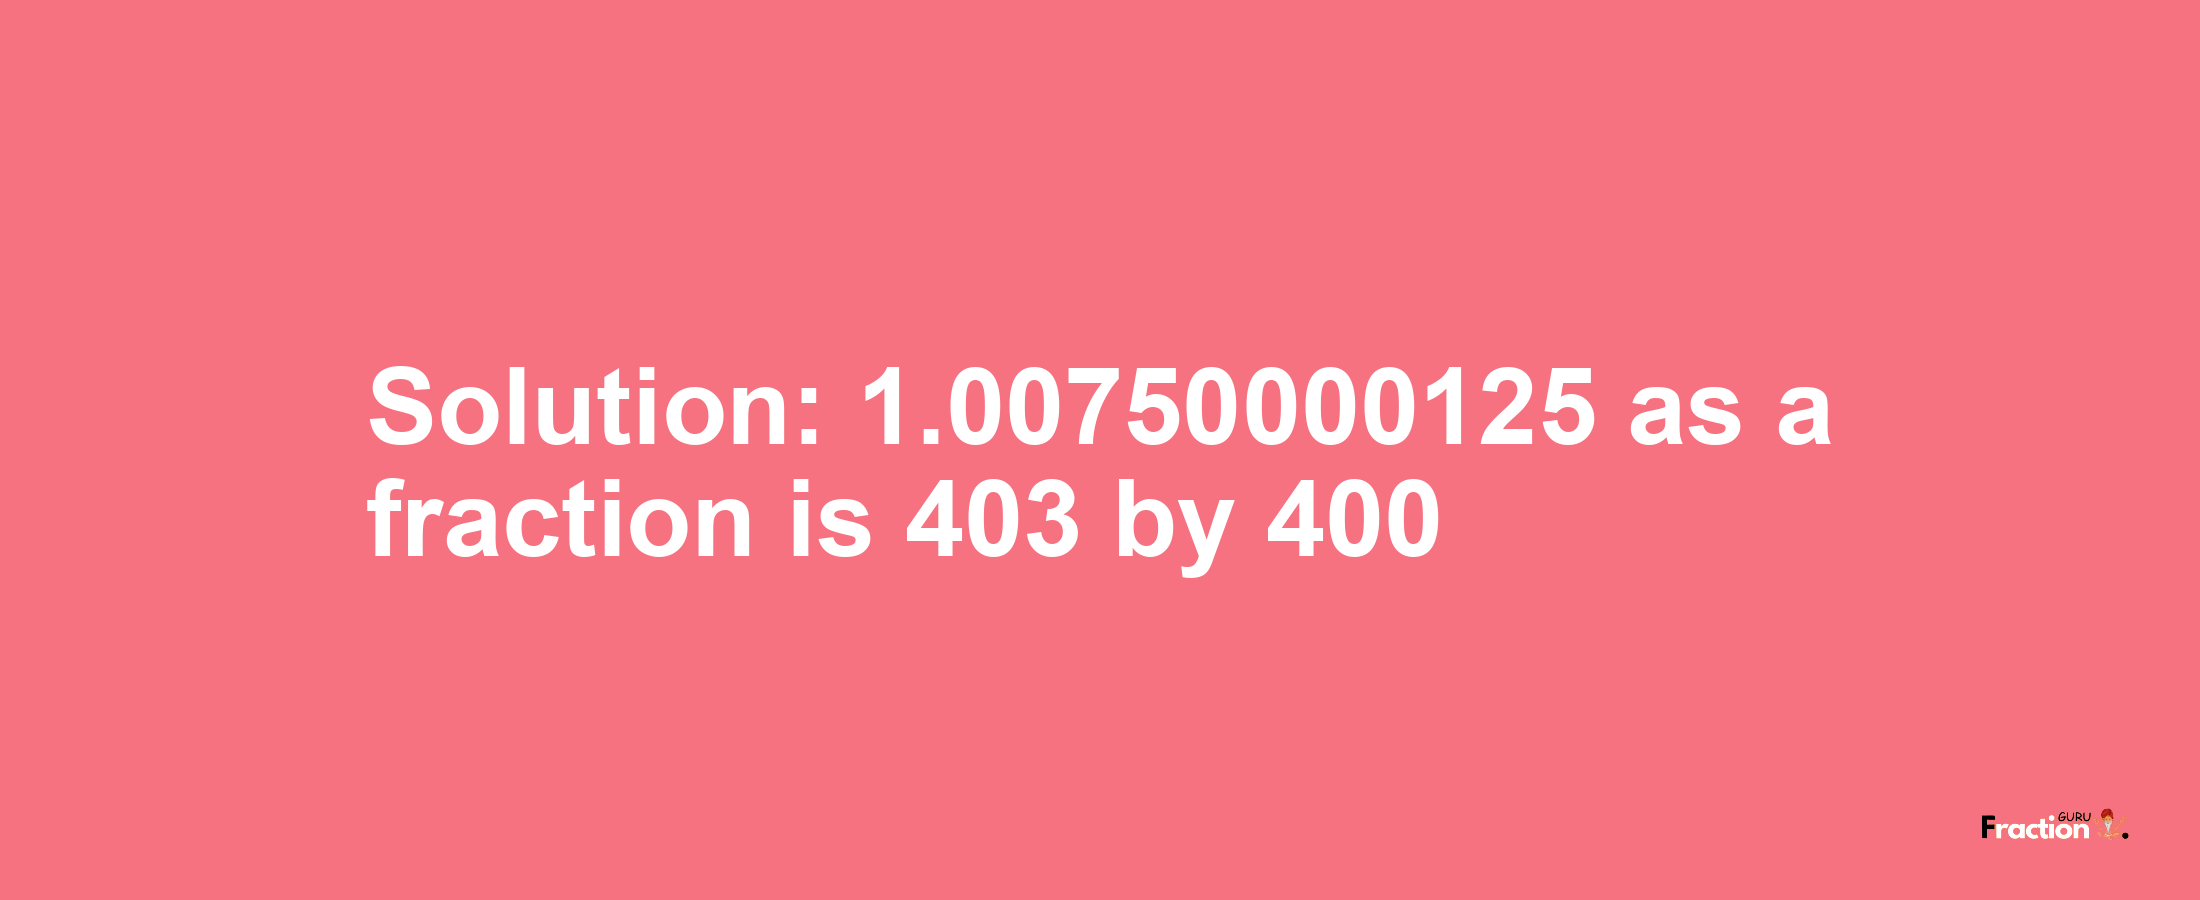 Solution:1.00750000125 as a fraction is 403/400